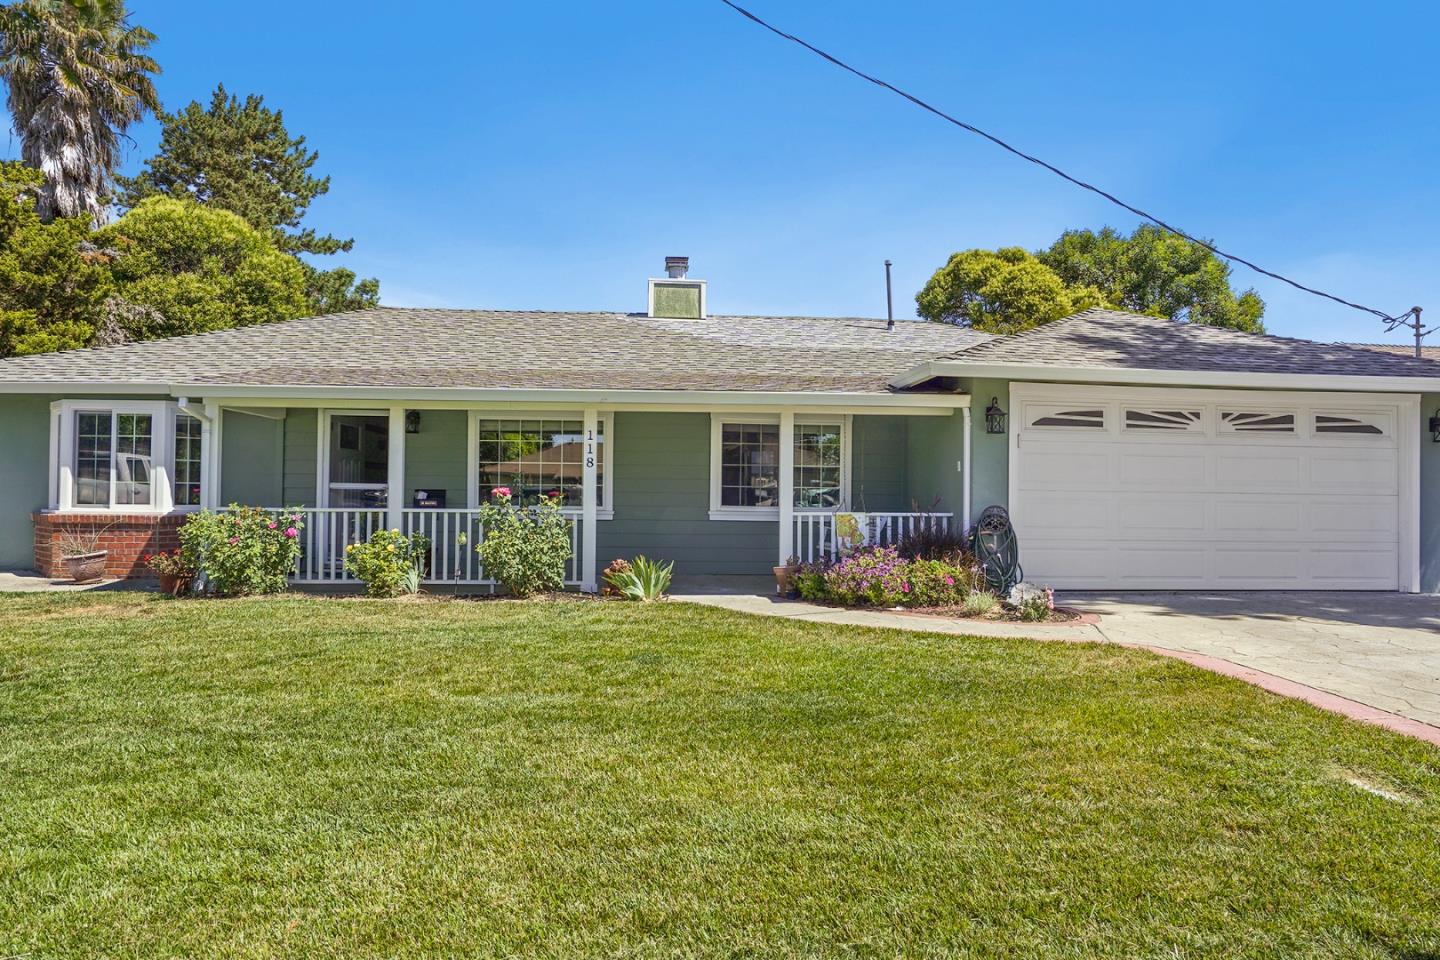 Photo of 118 Margie Dr in Pleasant Hill, CA